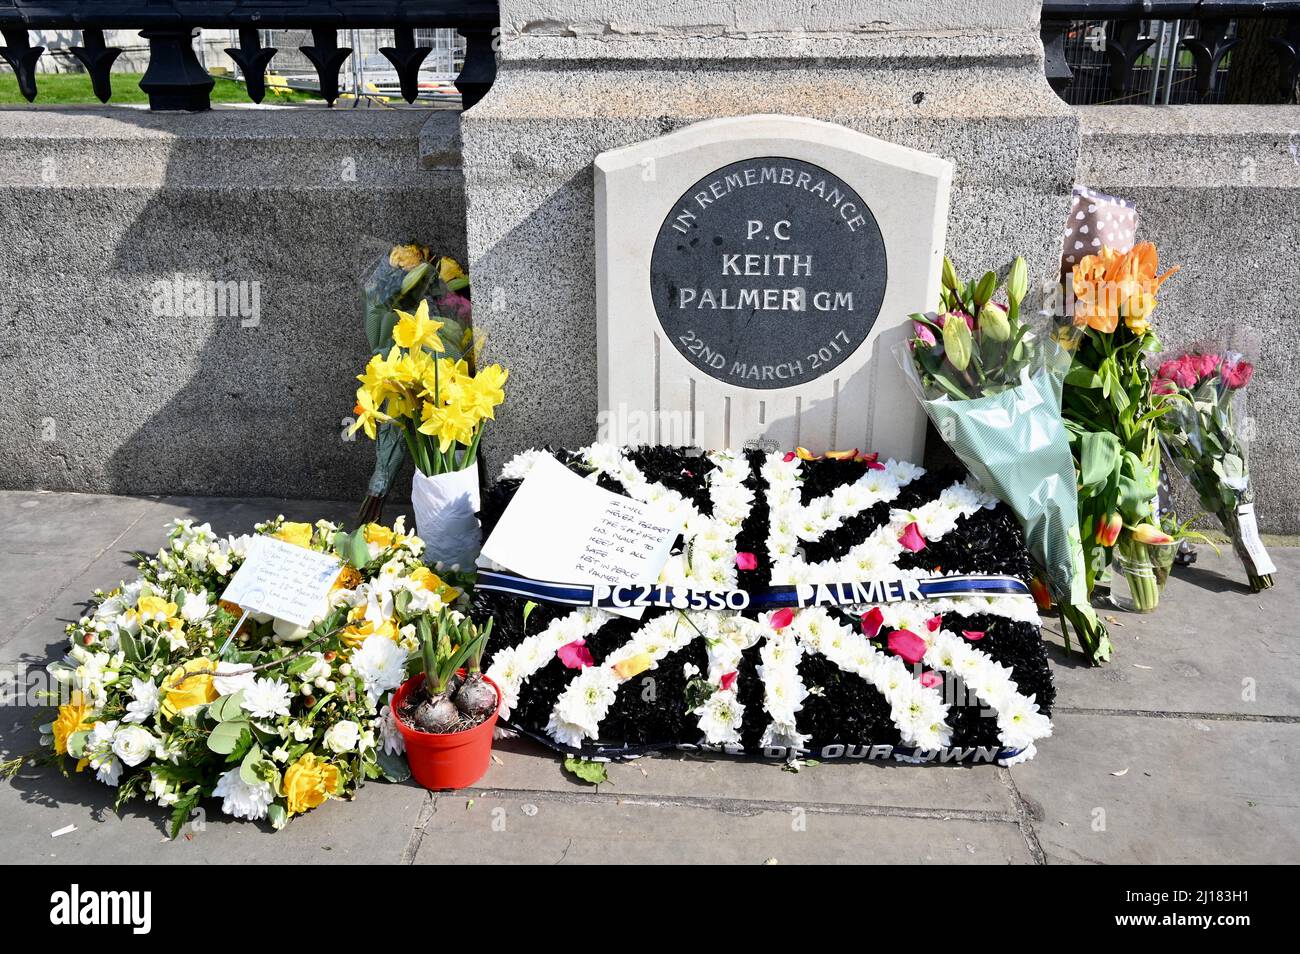 London, UK. Floral tributes were left outside the Houses of Parliament for PC Keith Palmer who was posthumously awarded the George Medal.He died defending  the Palace of Westminster from attack on 22nd March 2017. Credit: michael melia/Alamy Live News Stock Photo